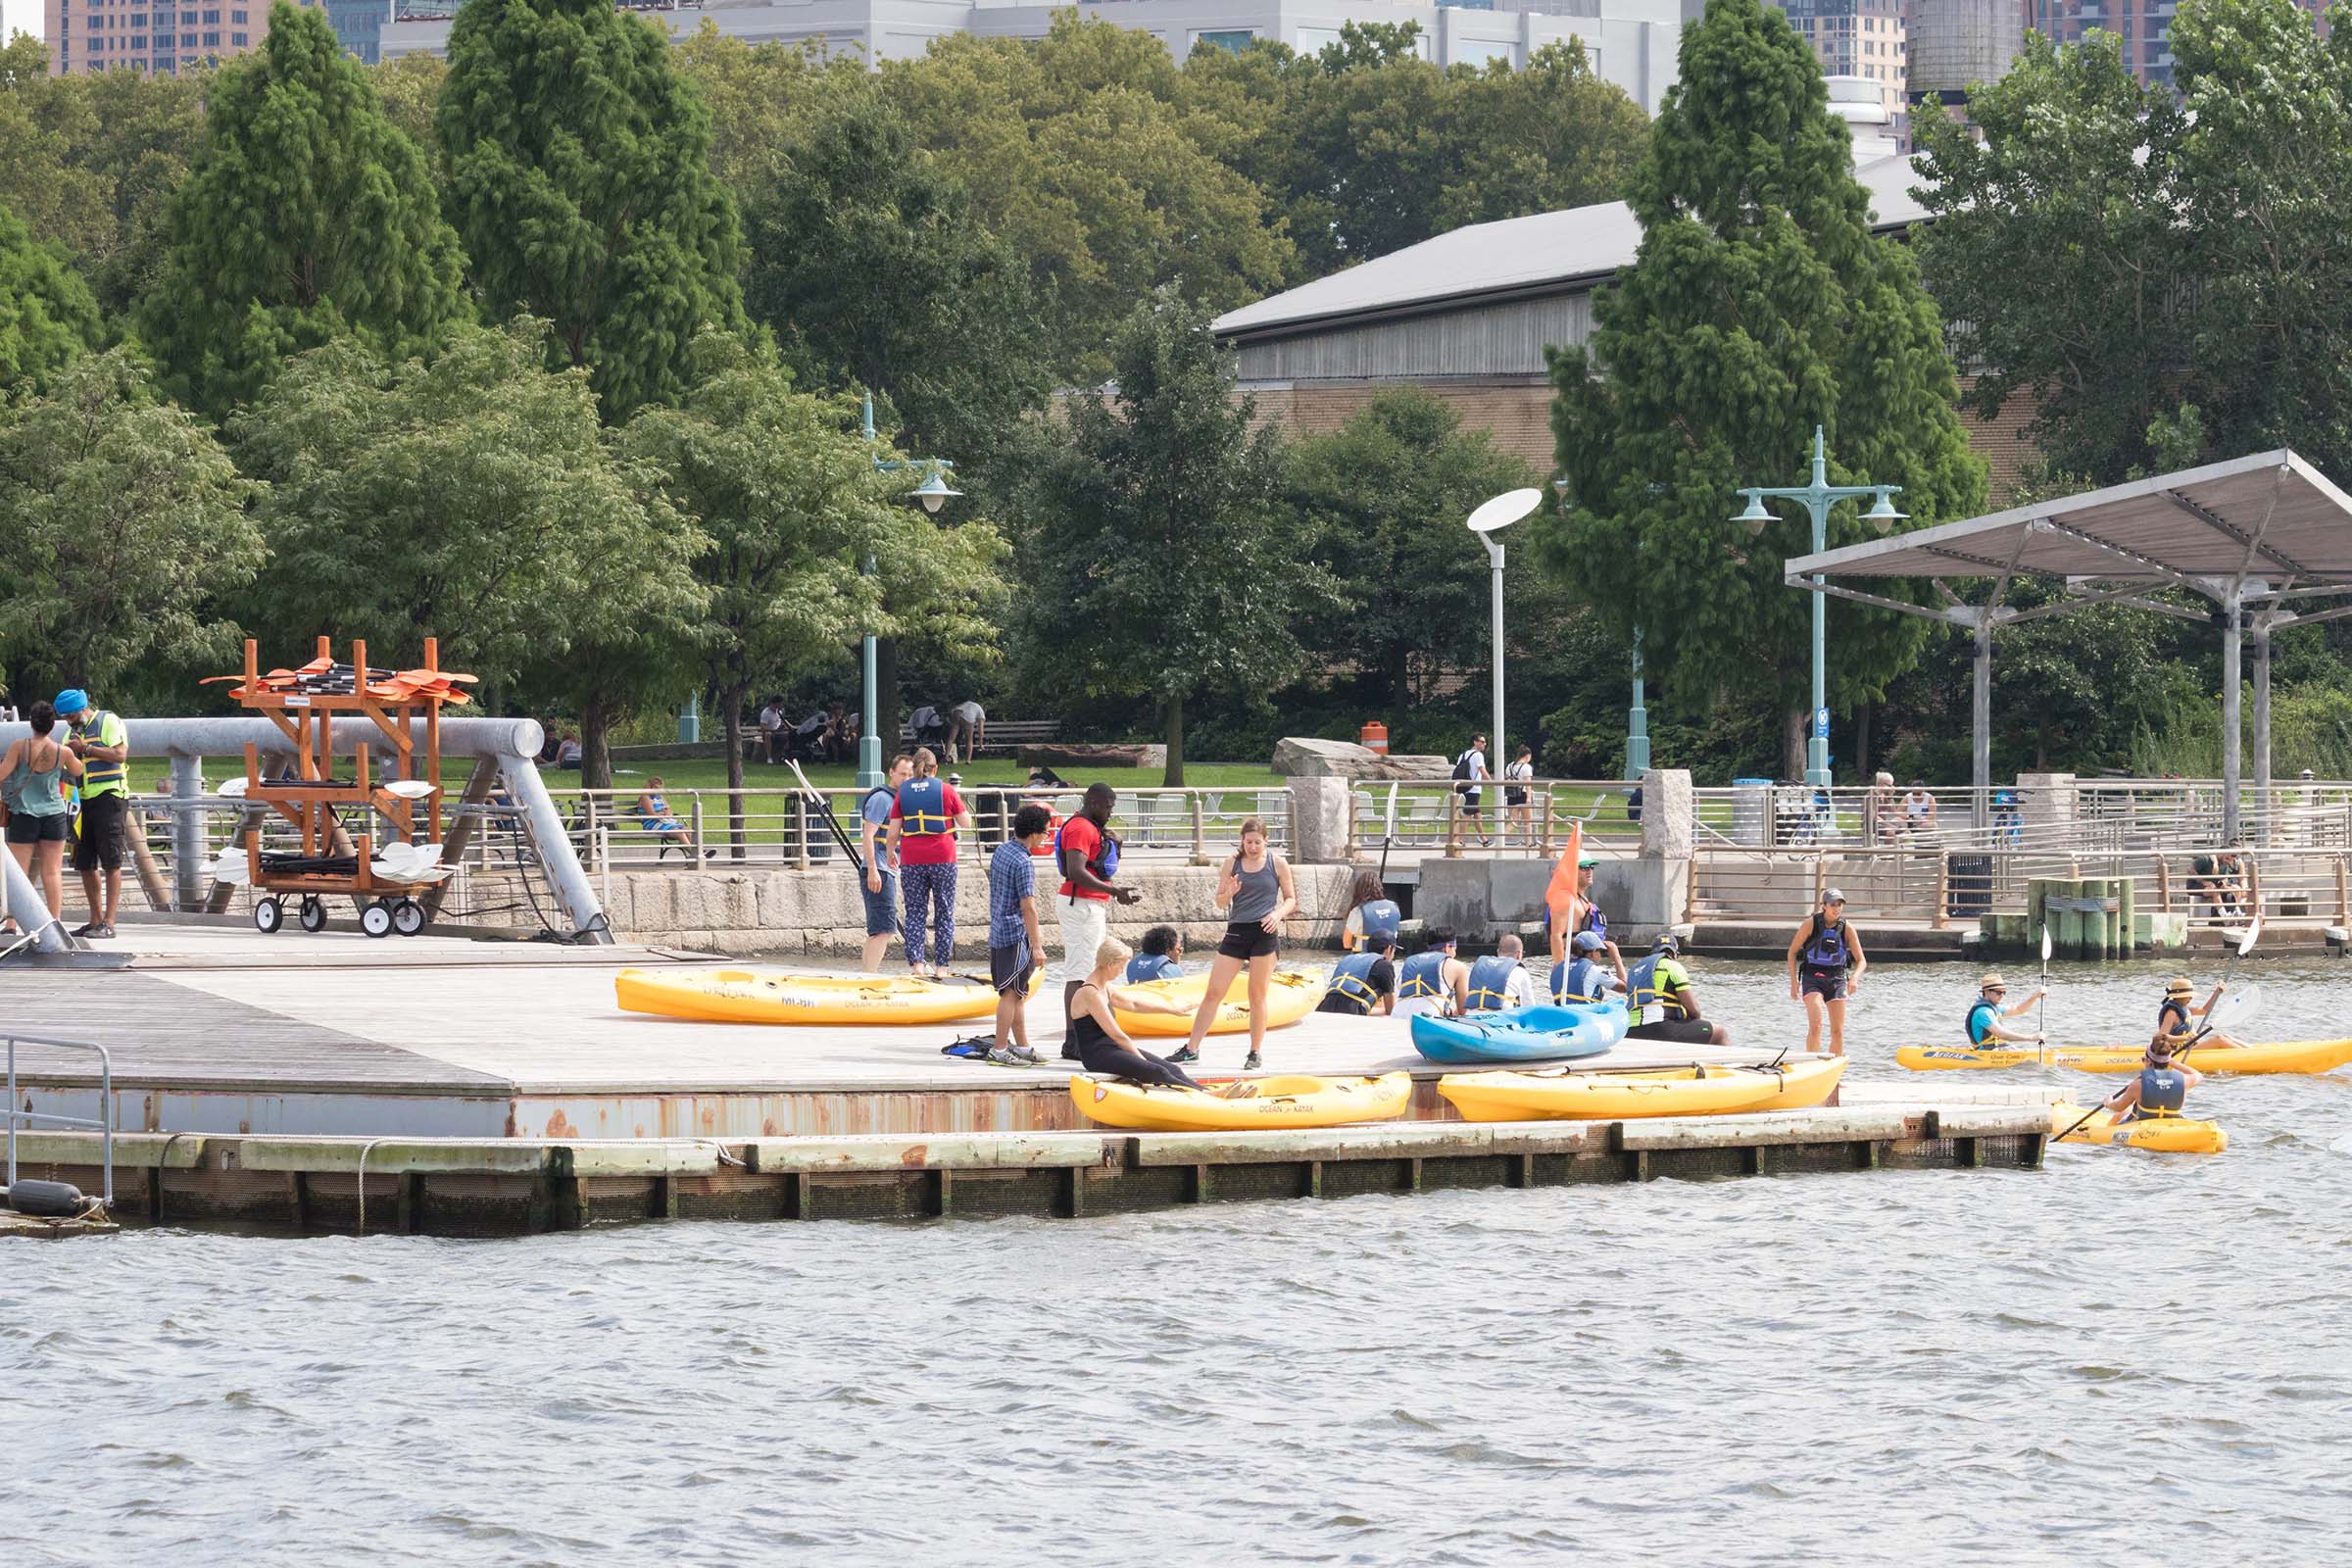 Kayakers prepare for launch in the Hudson River